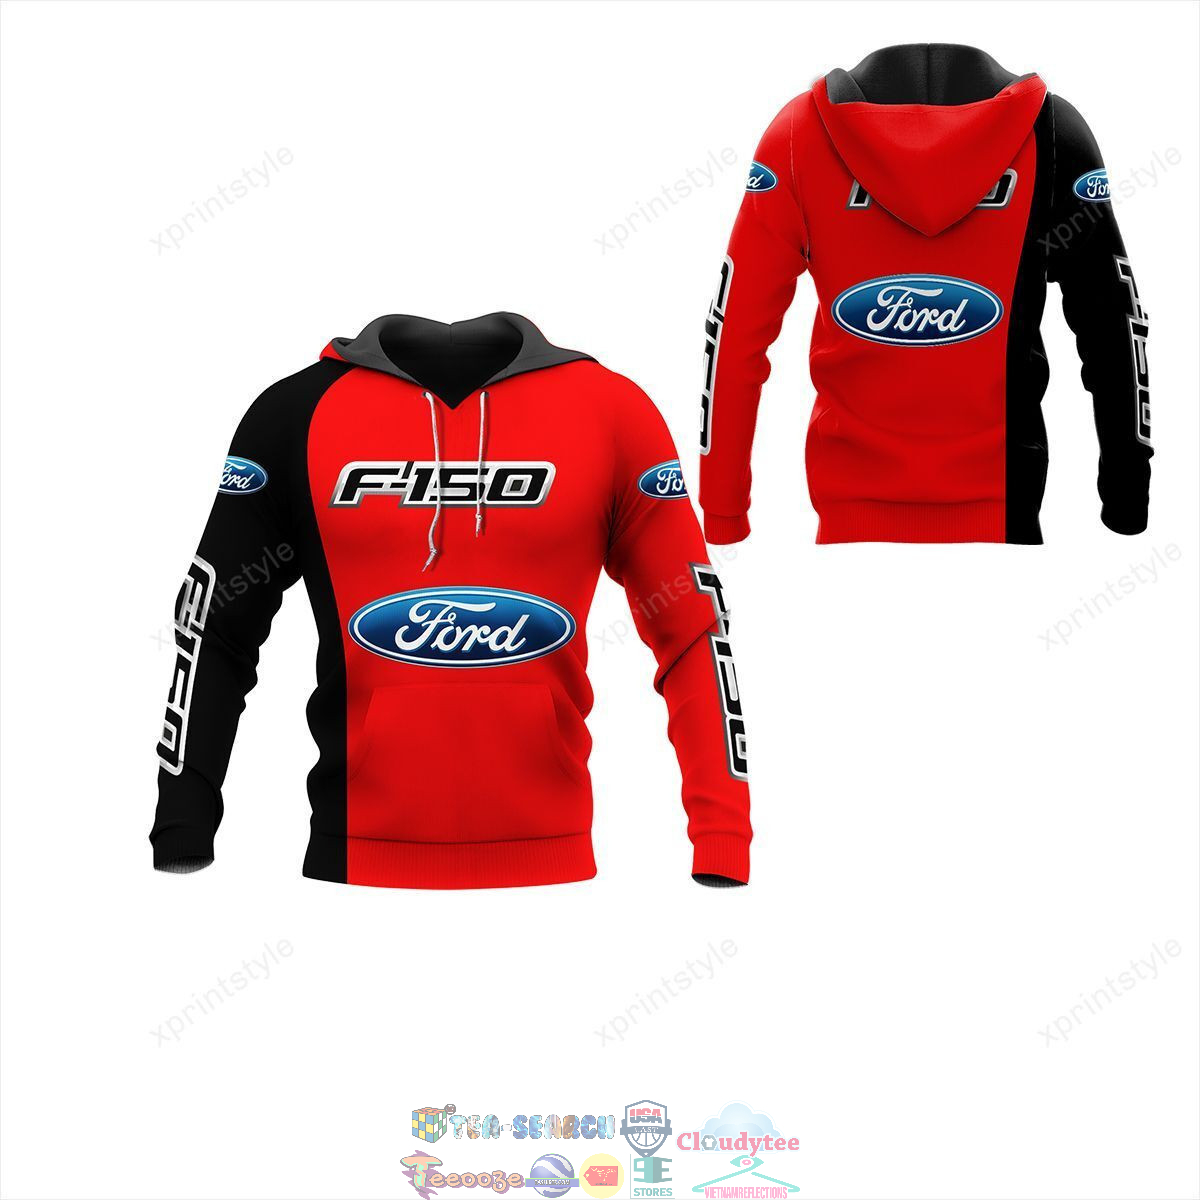 Ford F150 ver 11 hoodie and t-shirt